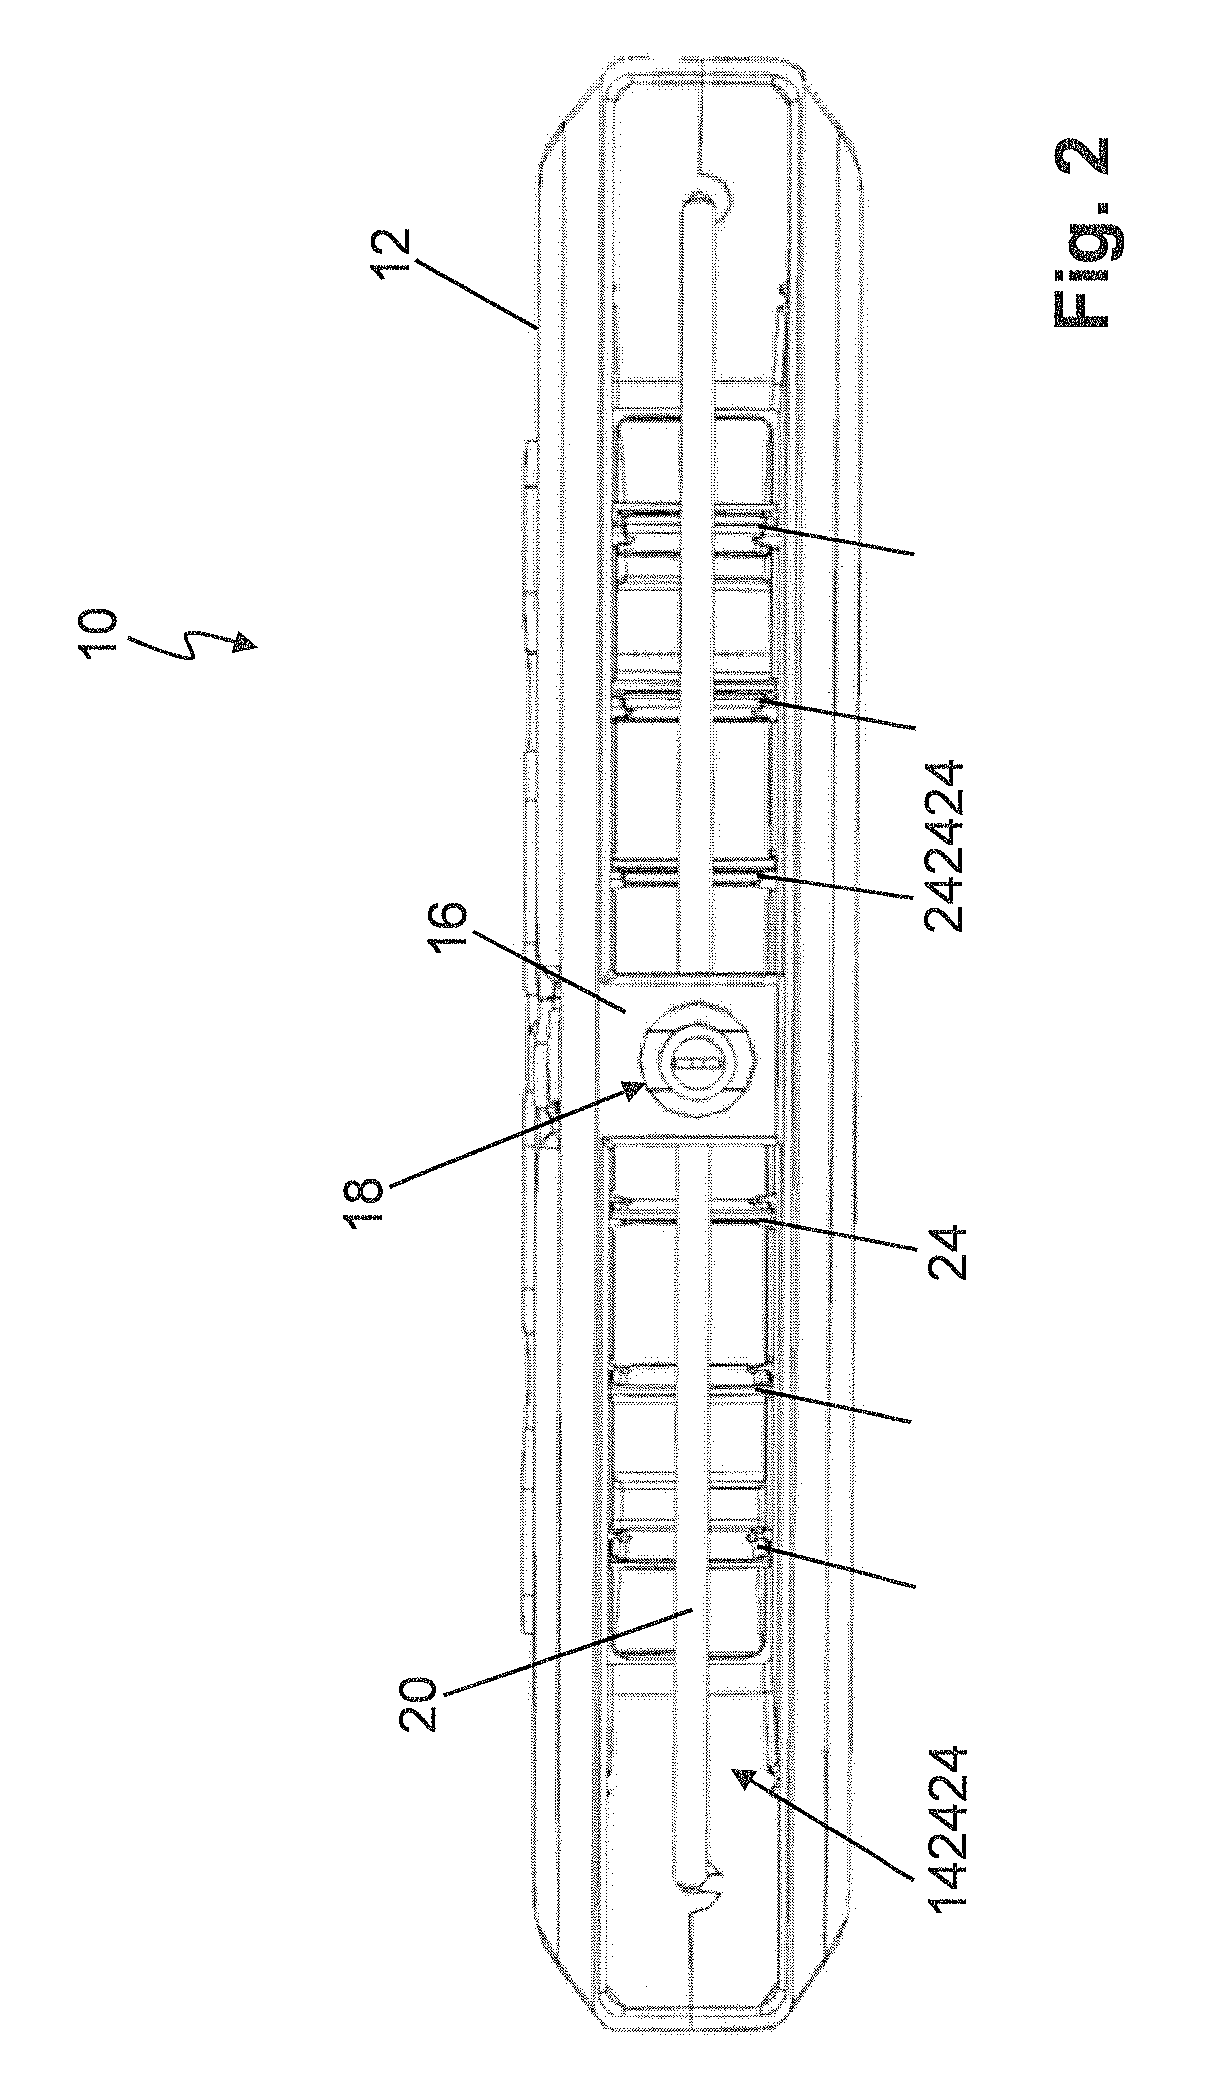 Device for controlling an air stream